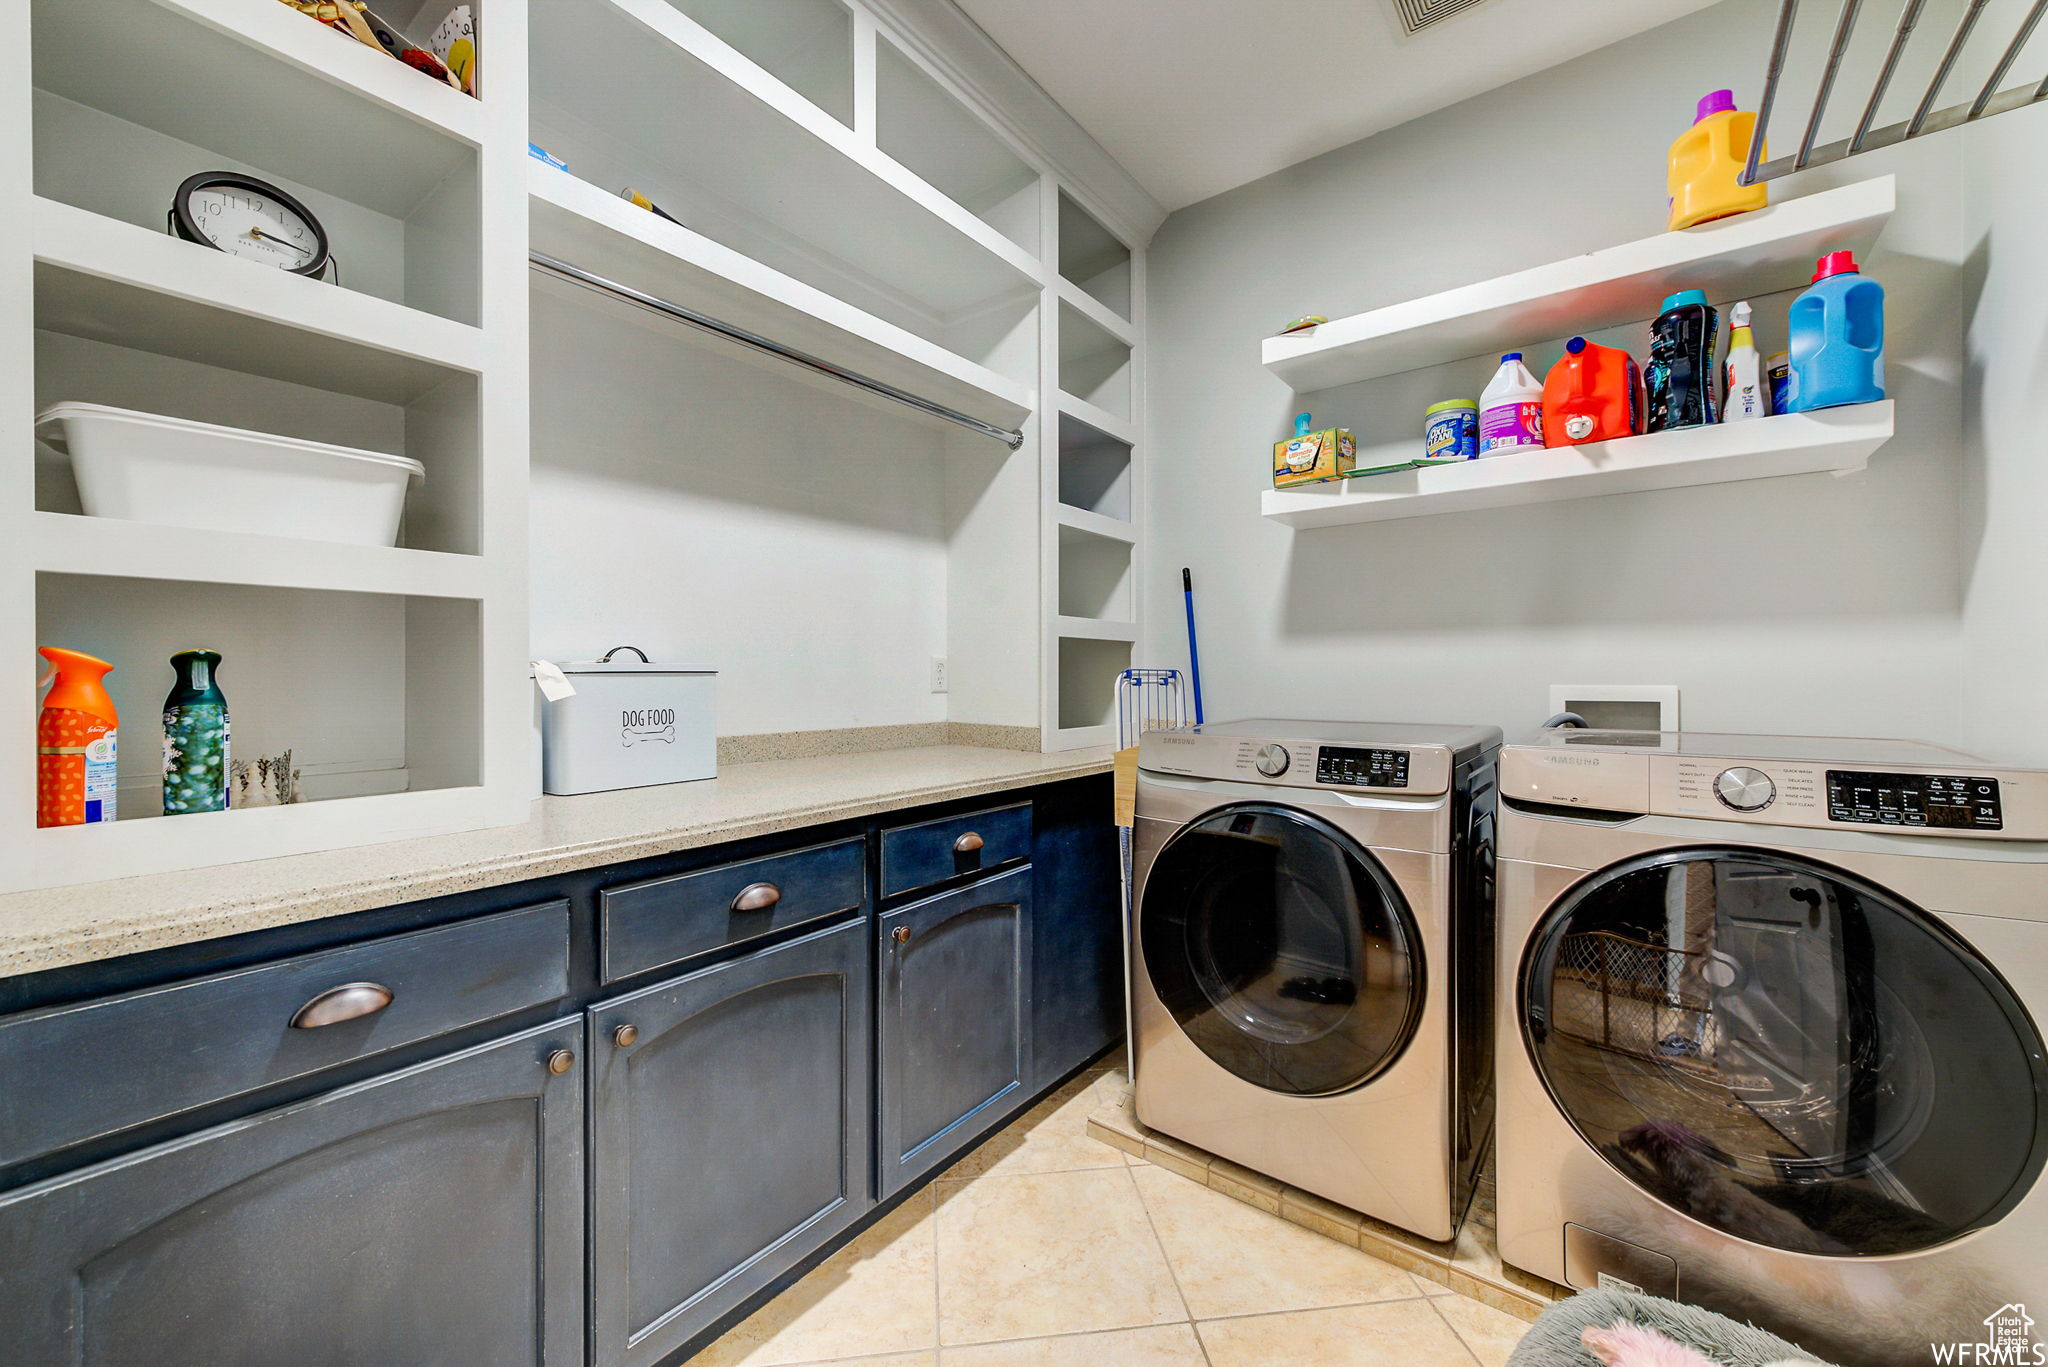 Washroom featuring light tile floors, cabinets, hookup for a washing machine, and independent washer and dryer